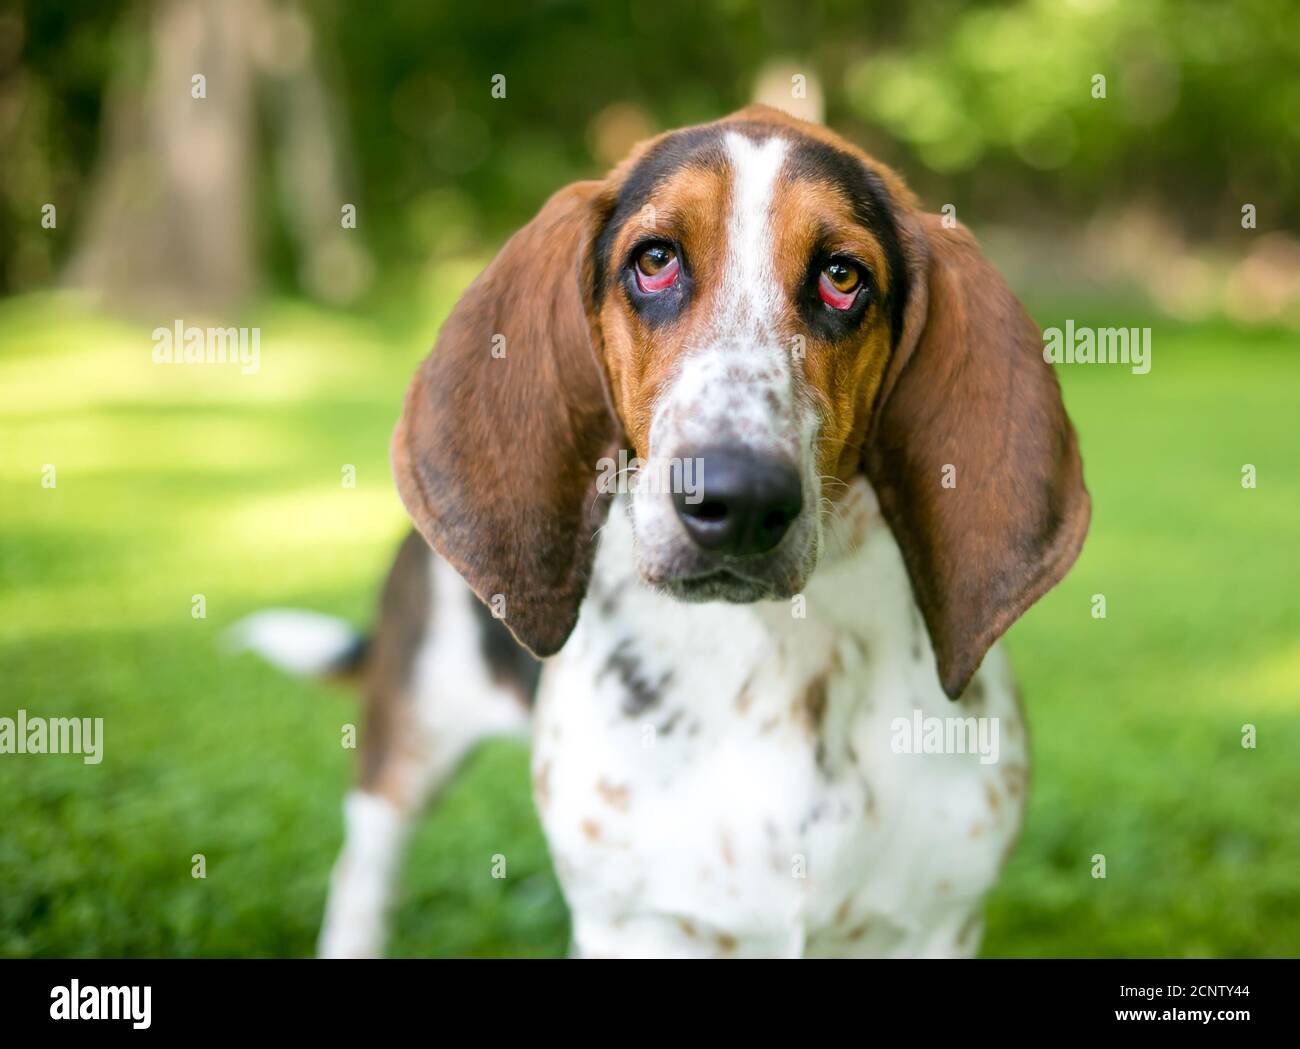 A Bassett Hound dog with ectropion or drooping eyelids Stock Photo